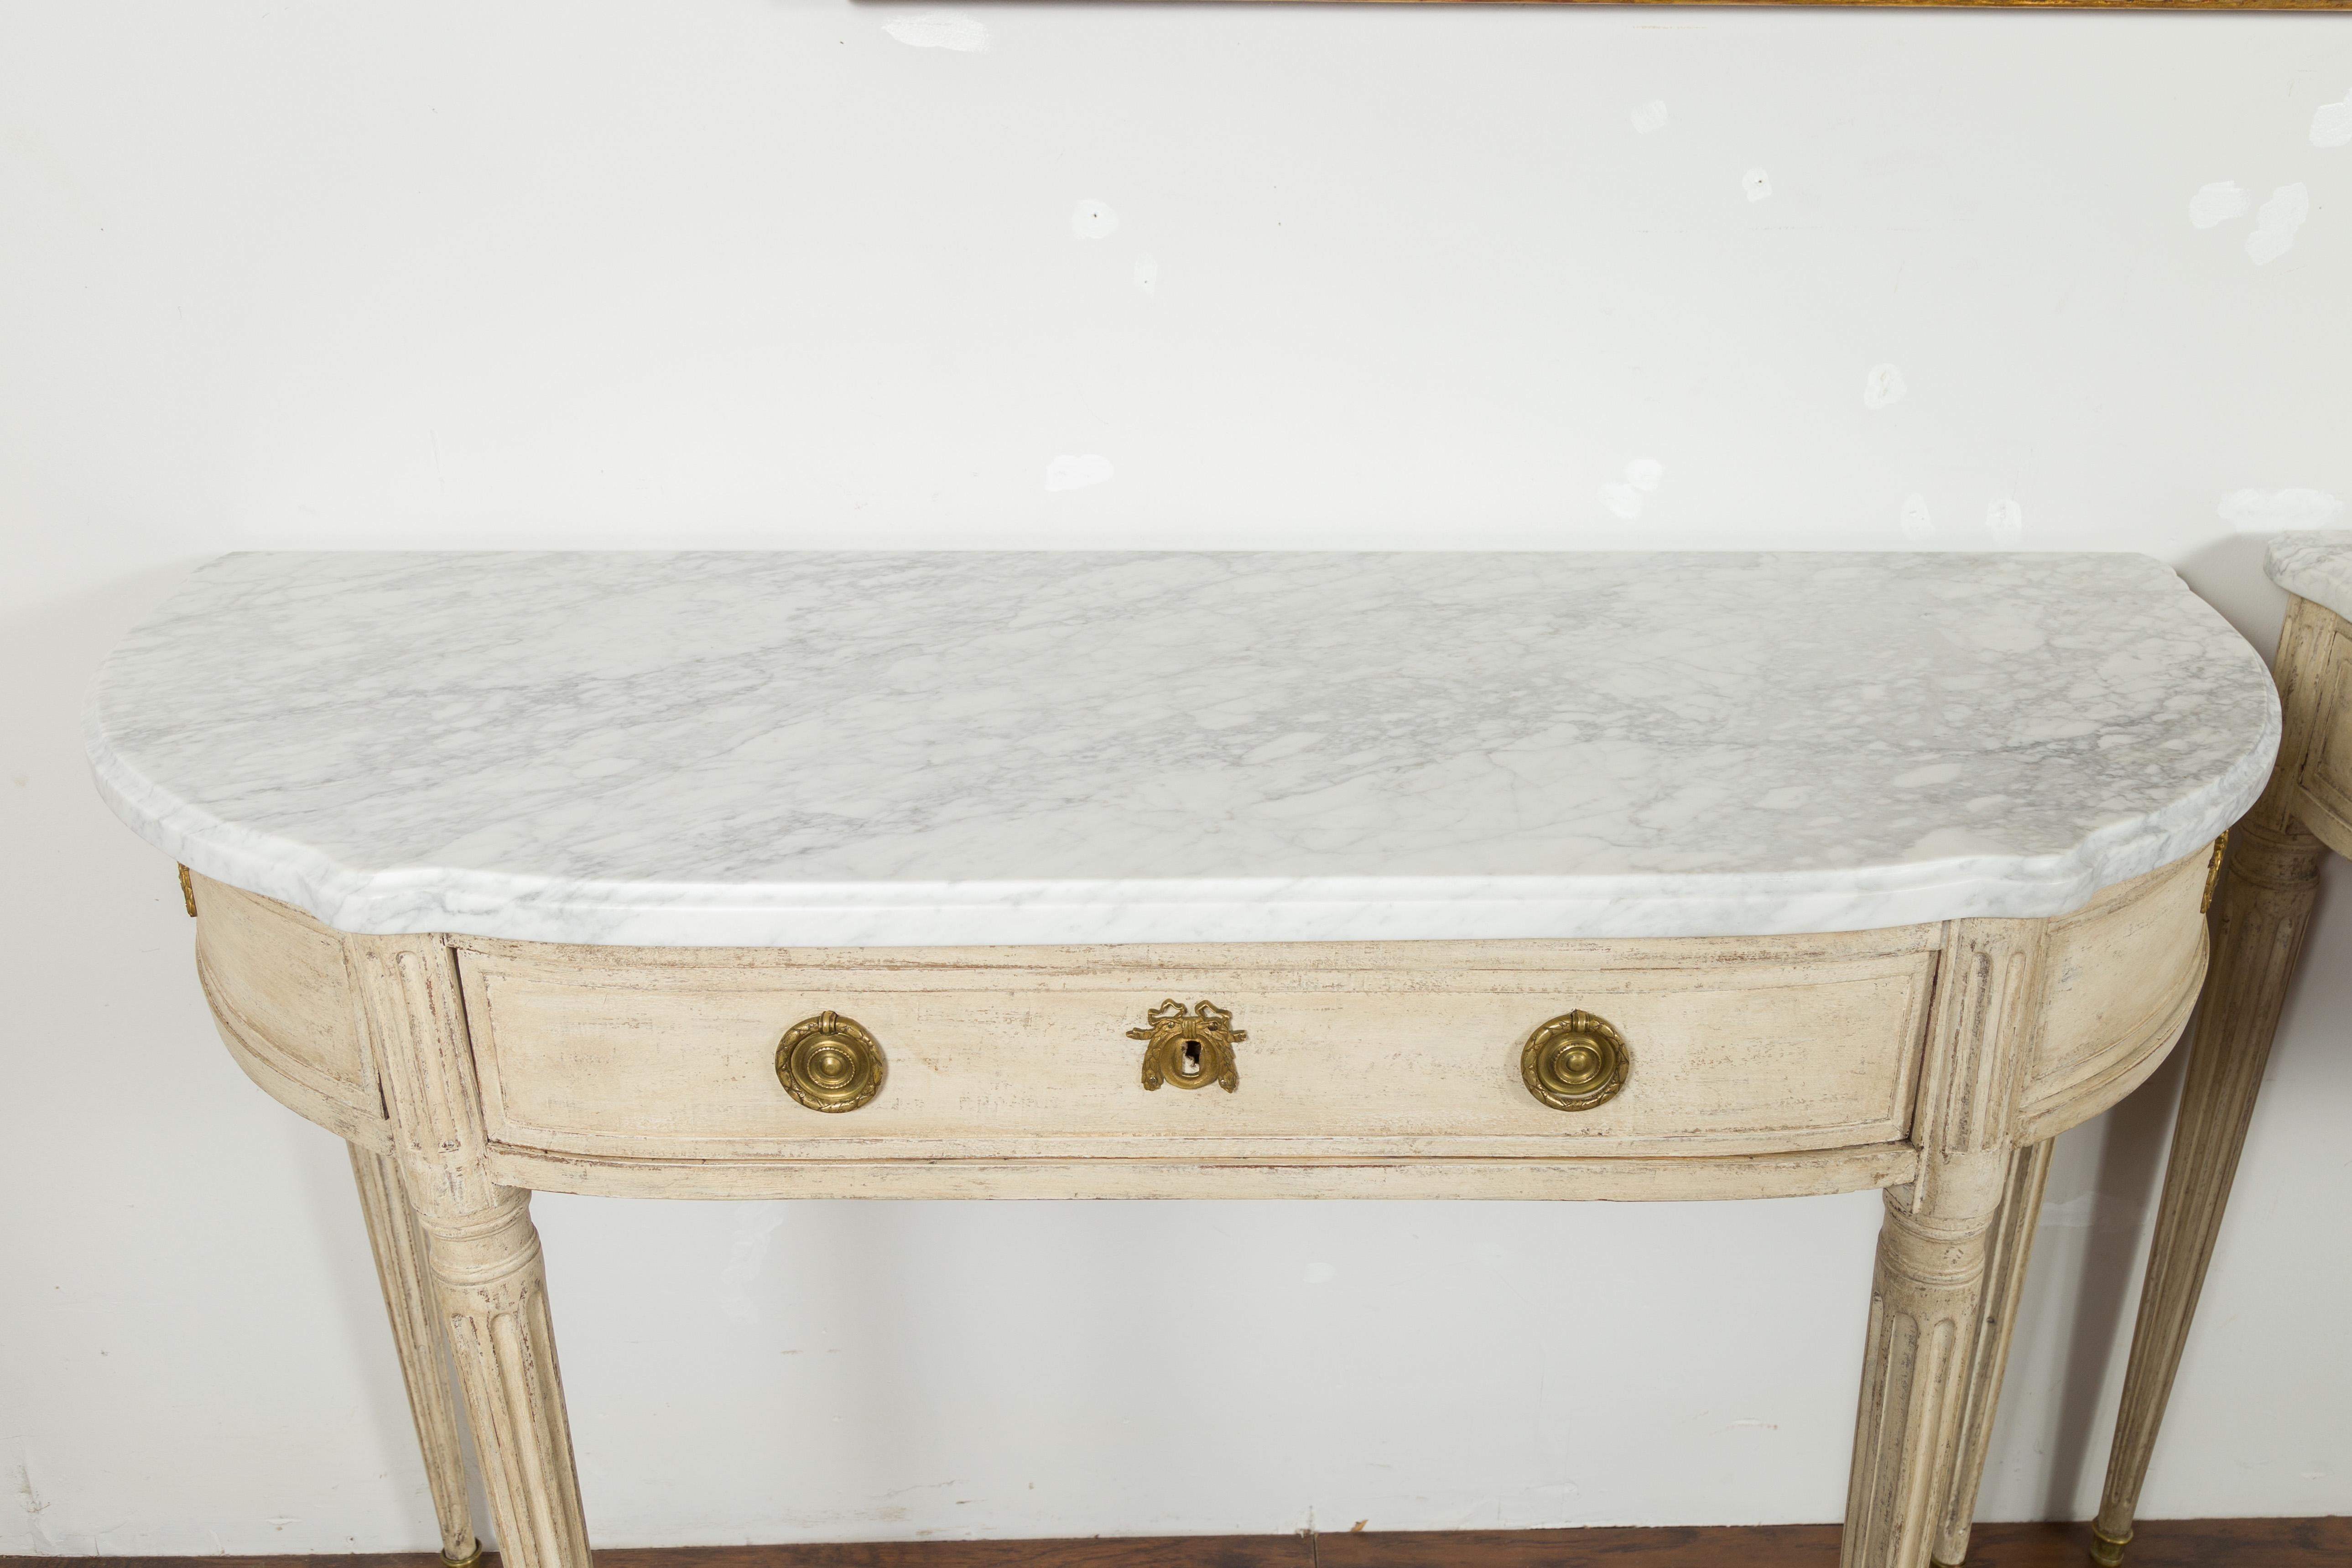 Pair of French 19th Century Neoclassical Style Demilune Tables with Marble Tops For Sale 2